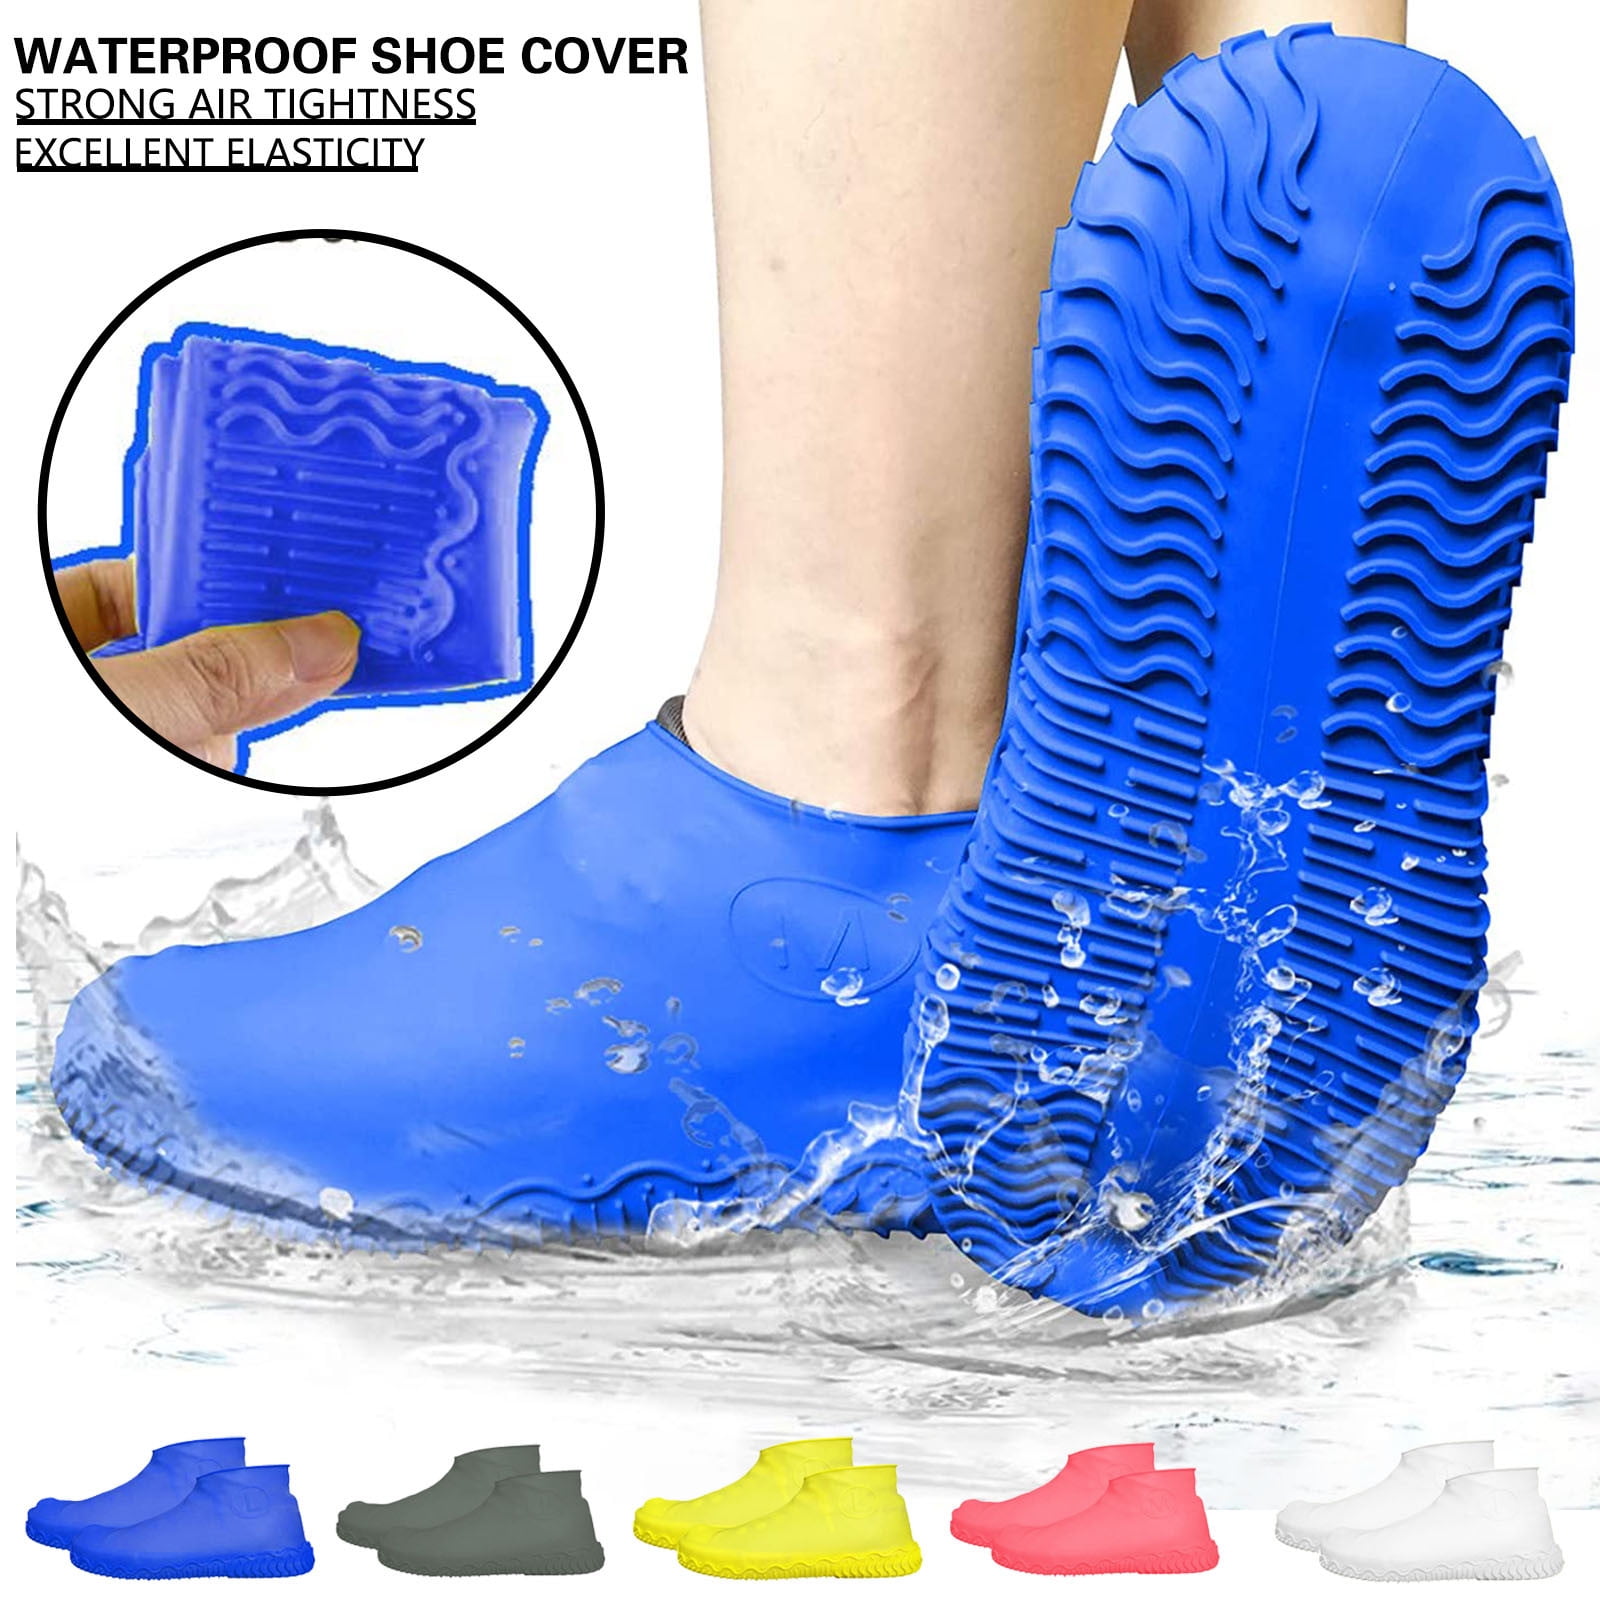 100Pcs Shoes Cover Practical Waterproof Shoe Cover for Boys Children Kids 